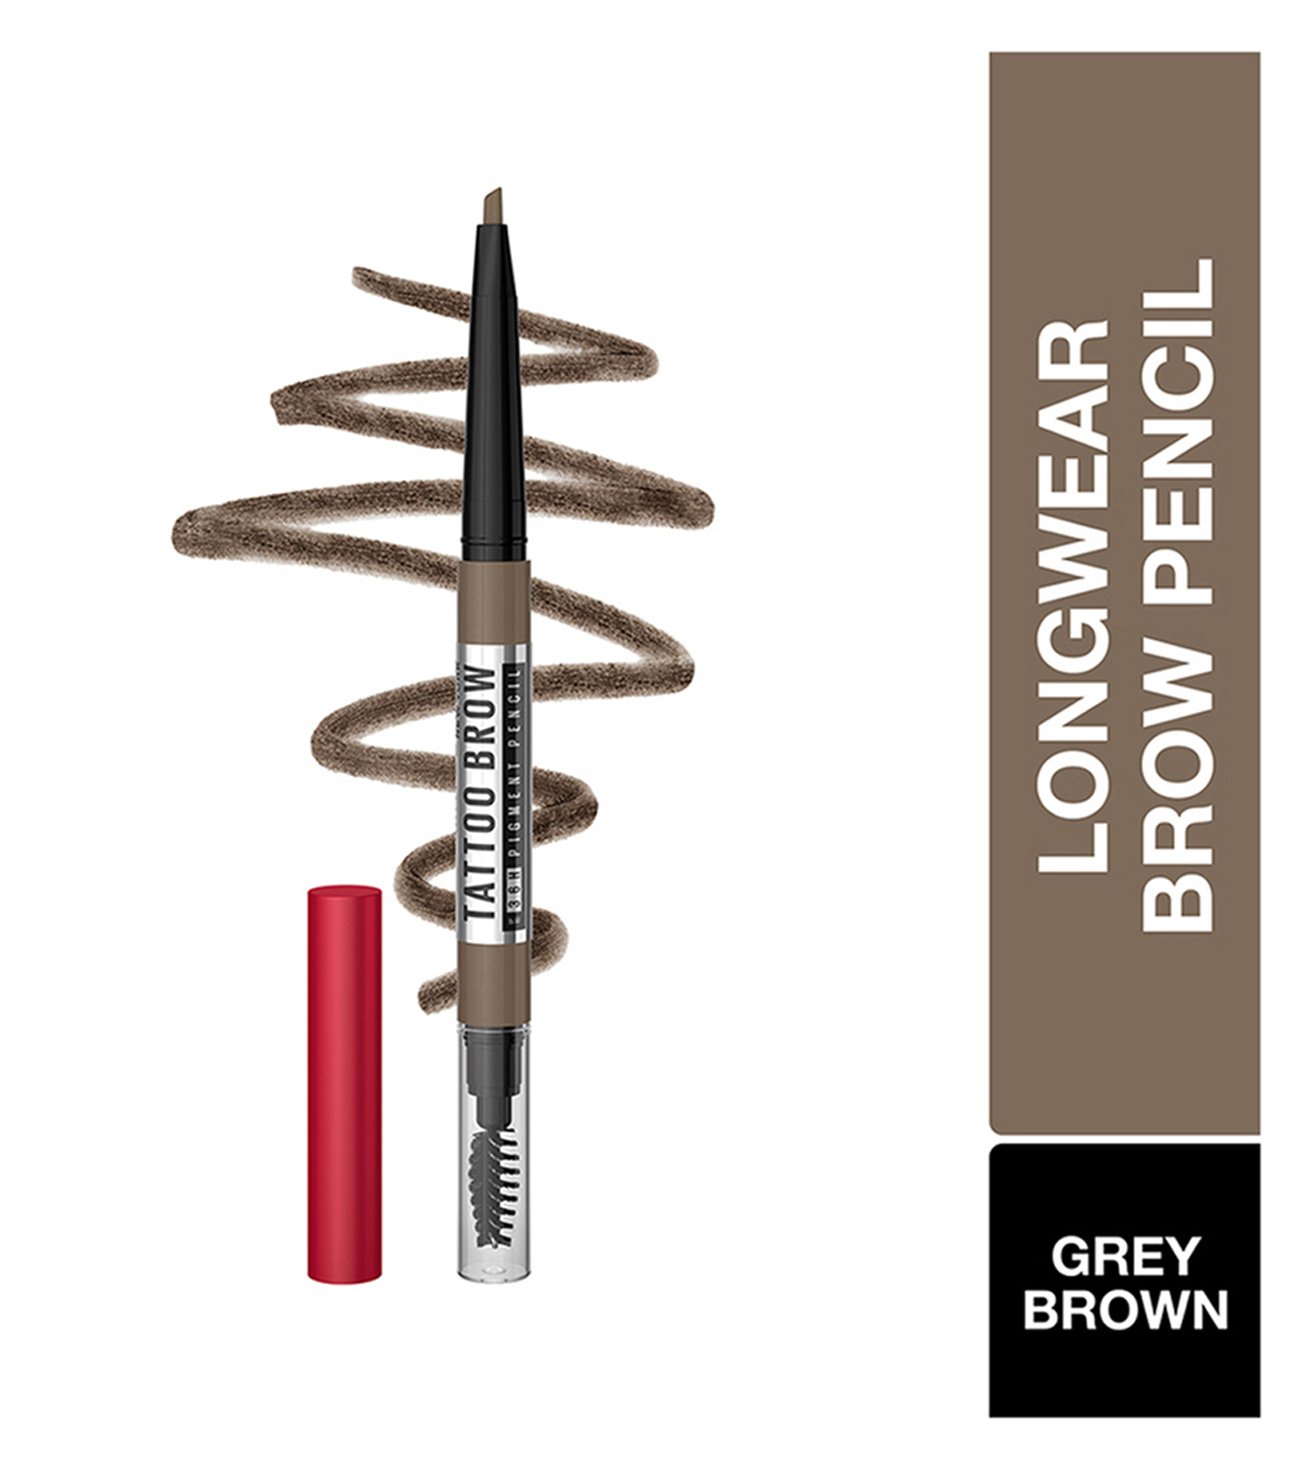 Buy Maybelline New York Tattoo Brow 36h Brow Pencil - Grey Brown